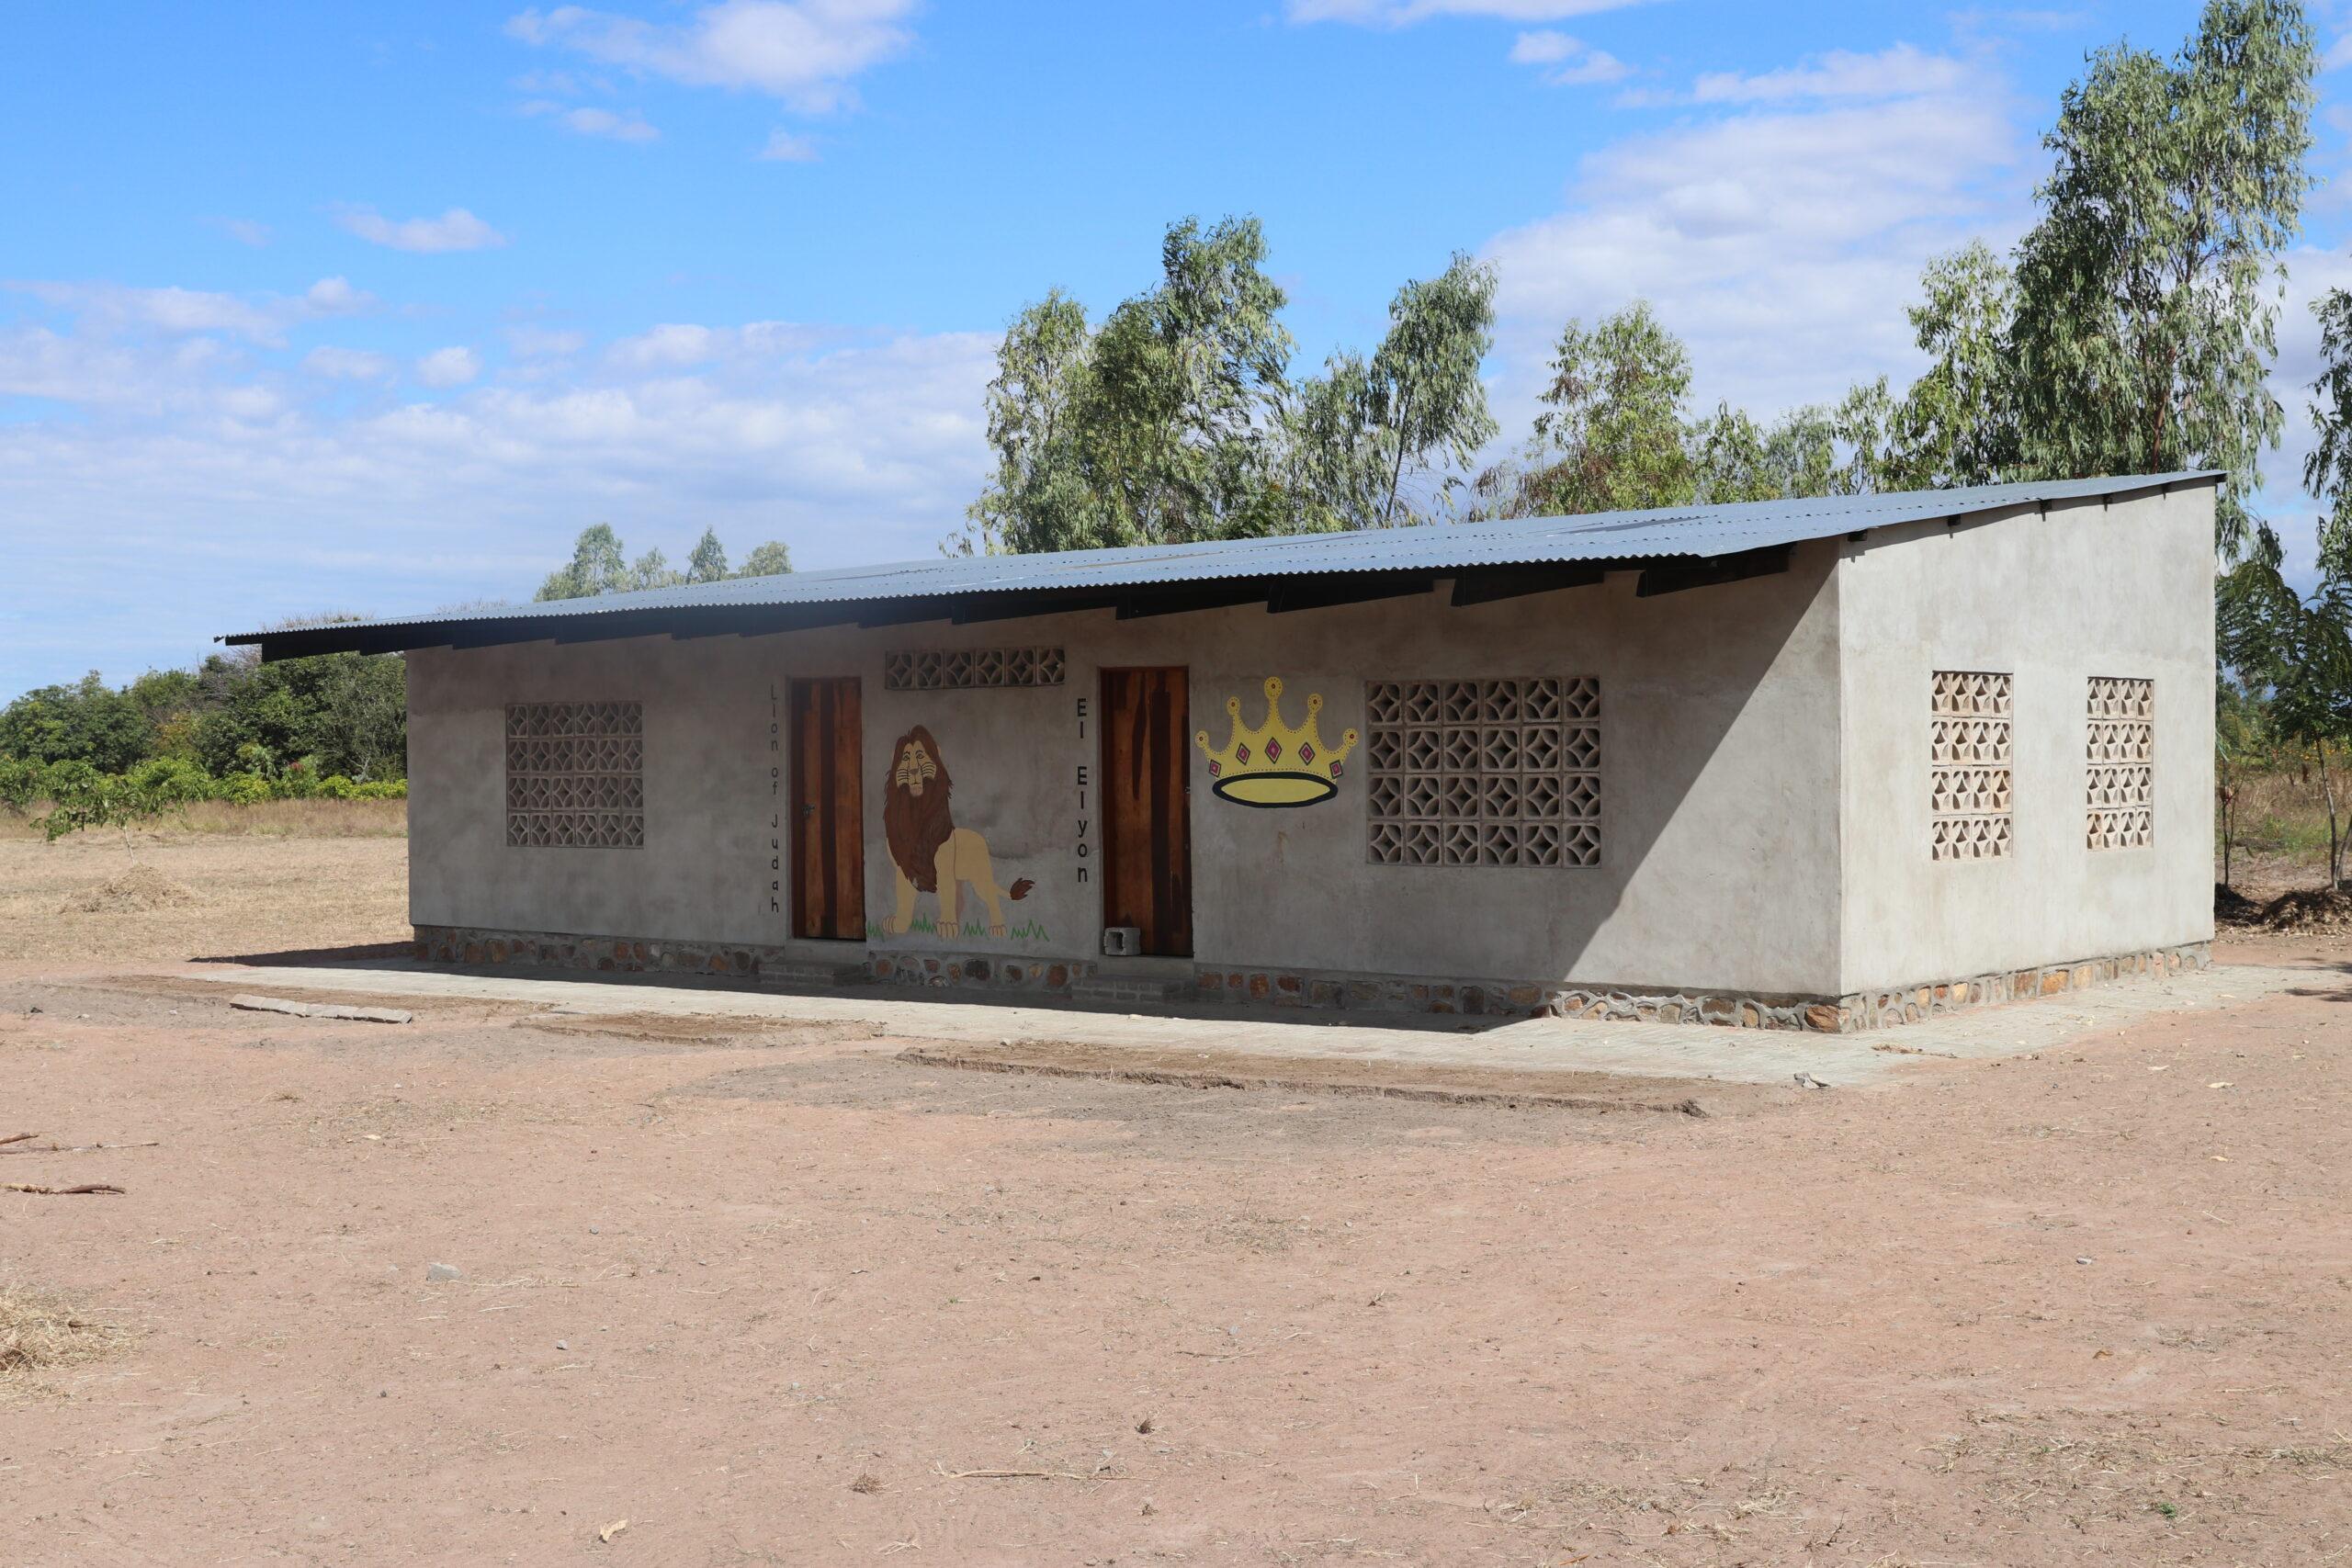 MALAWI | Jan. 7, 2022 — Christians Targeted in Response to Gospel Revival Among the Yao People